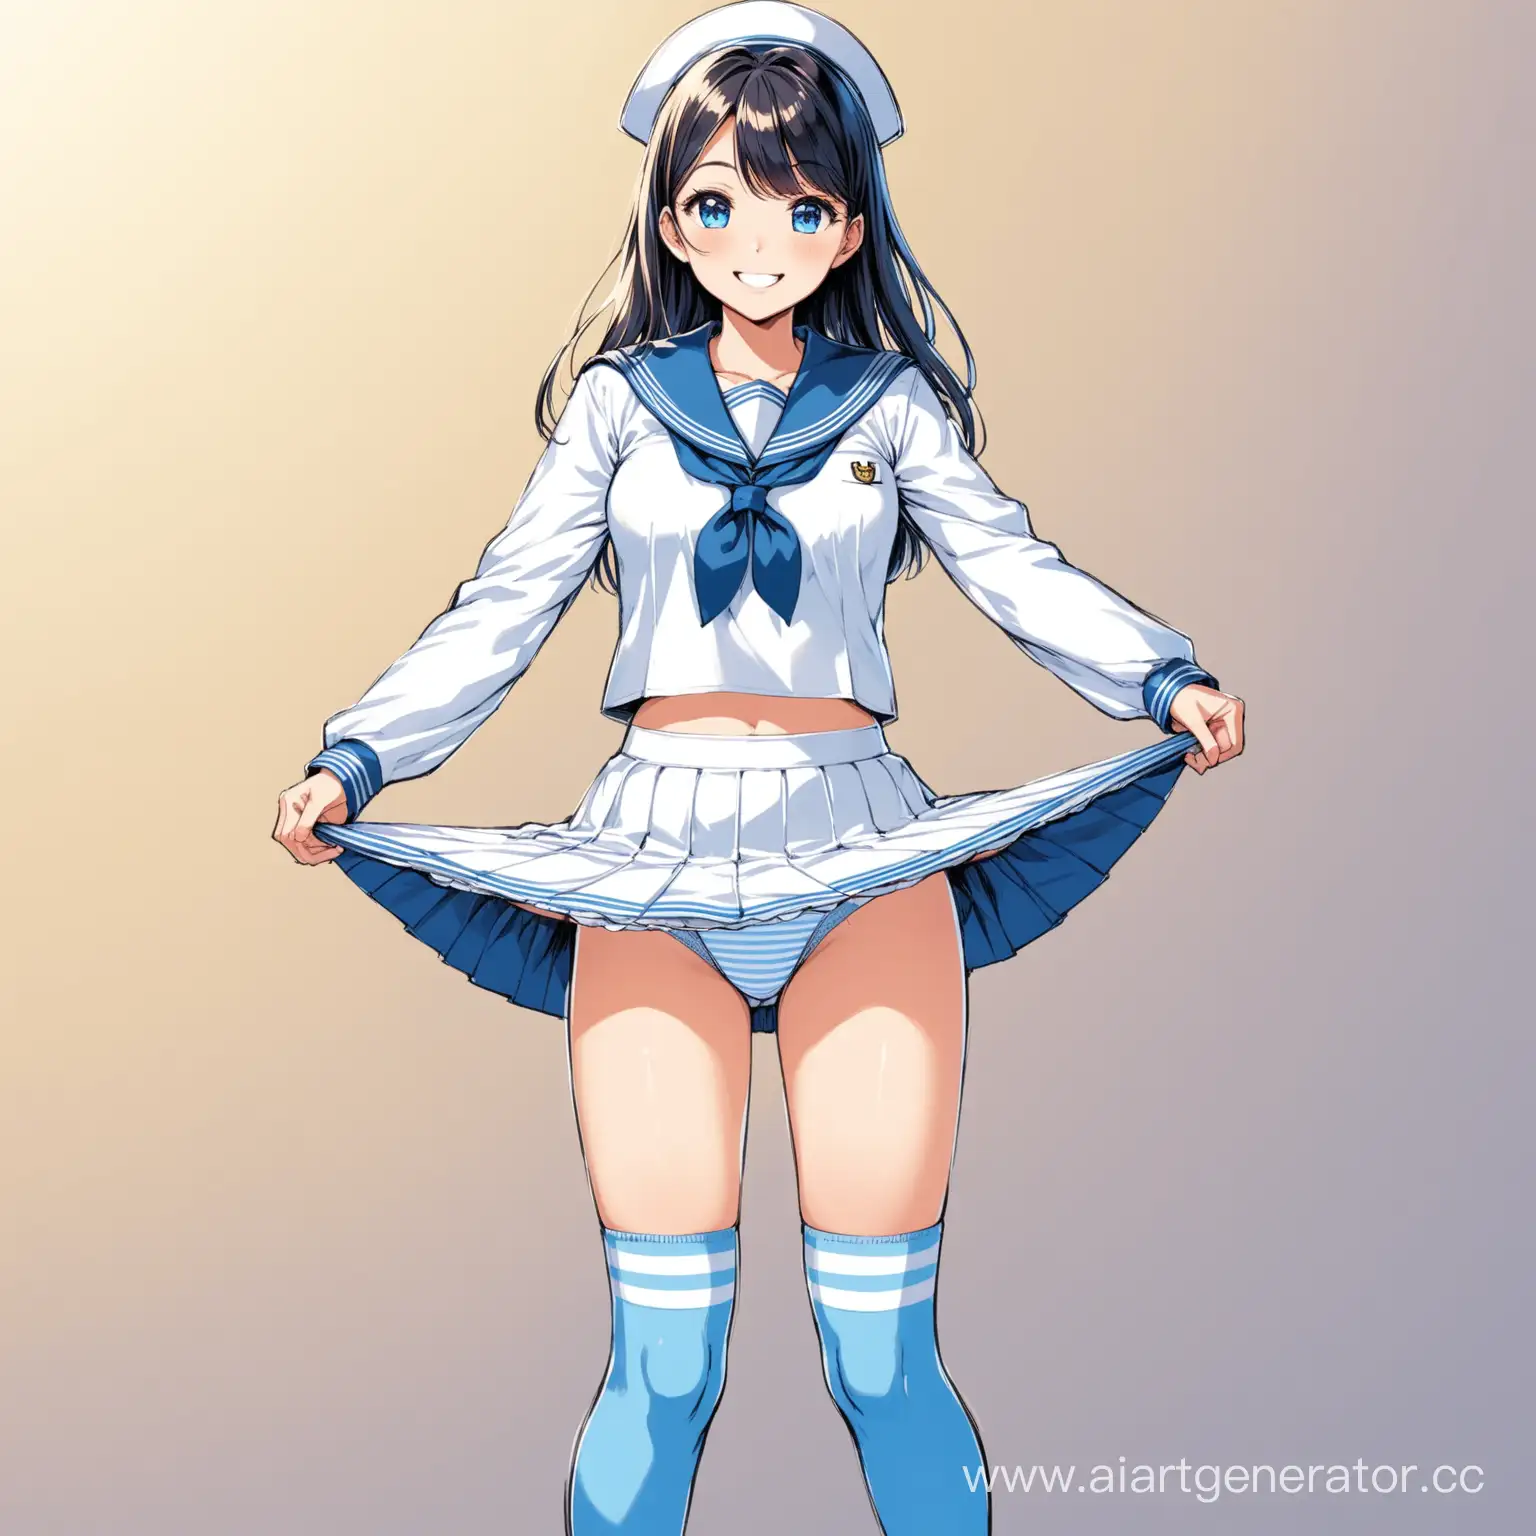 Beautiful woman, playmate-like proportions, symmetrical eyes, smile, holding the hem of her skirt, Light blue and white striped panties that lift her skirt to reveal her underwear,front view, lifting her skirt, sailor uniform, navv knee socks, loafers, school